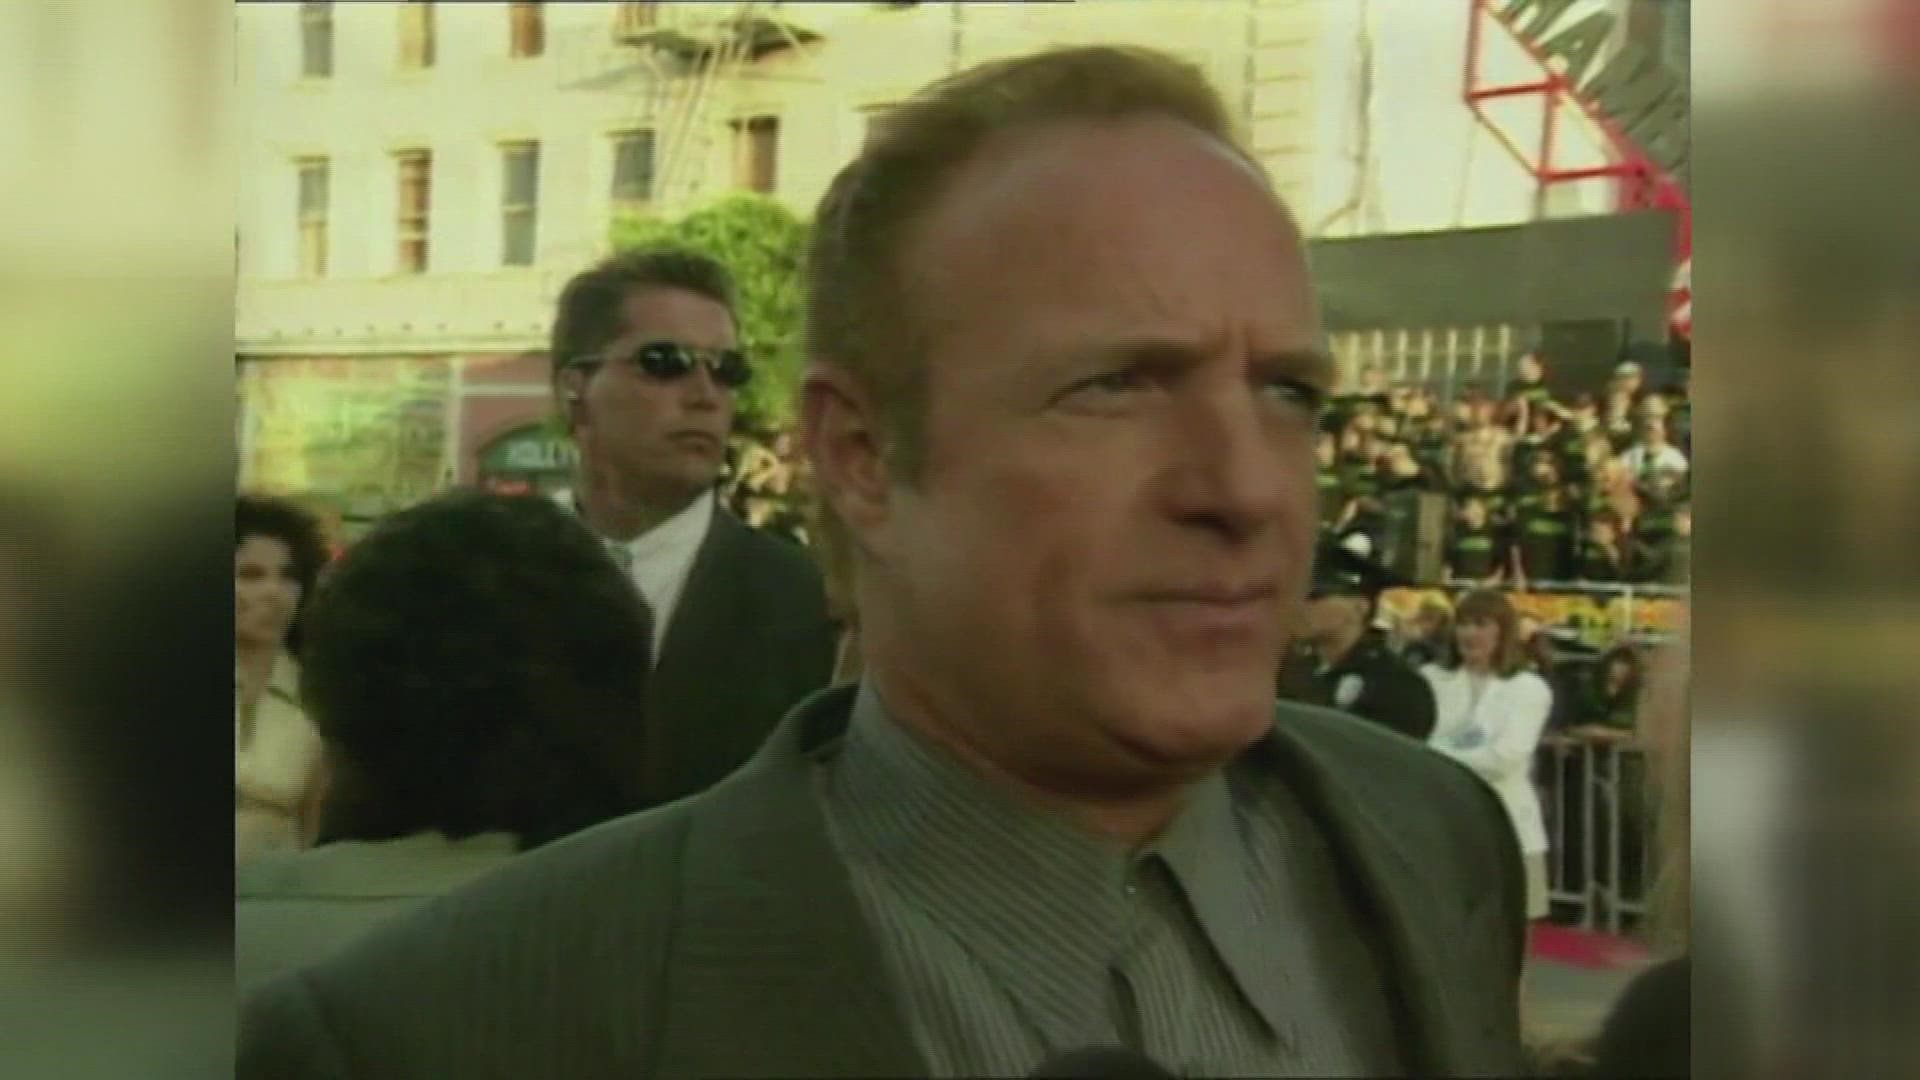 Actor James Caan, known for his role as Sonny Corleone in "The Godfather," died Wednesday night